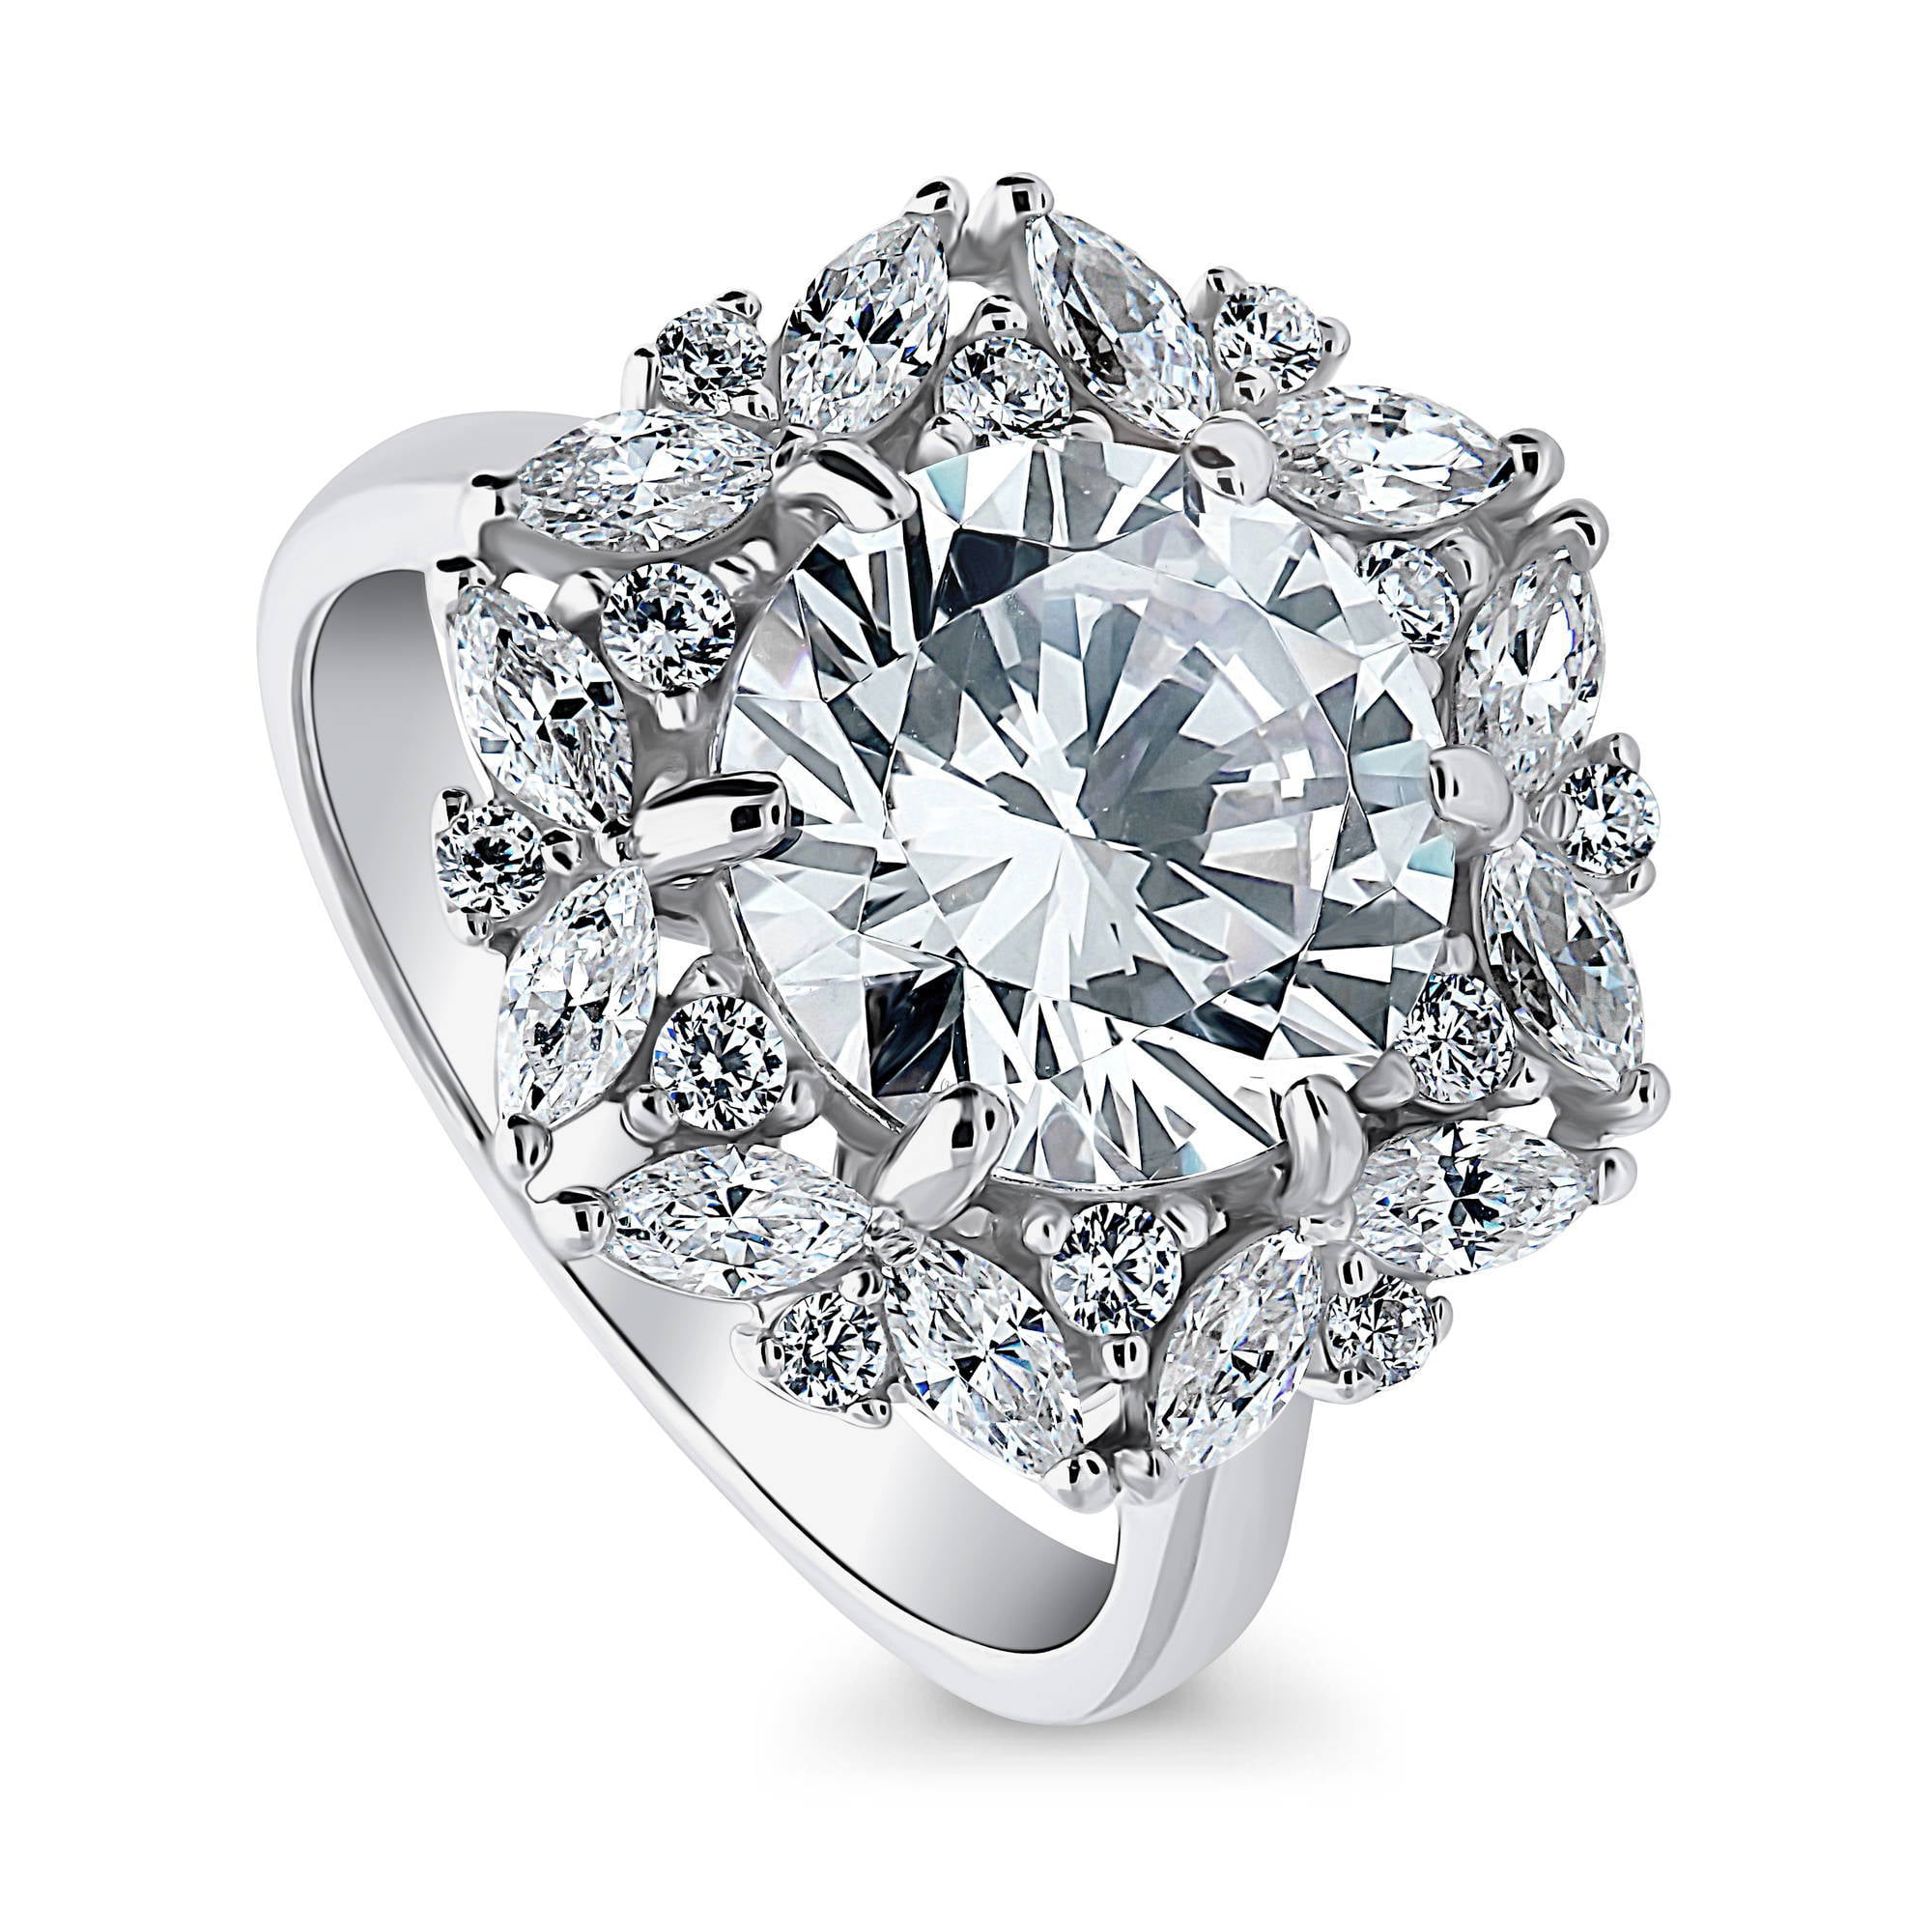 BERRICLE Rhodium Plated Sterling Silver Round Cubic Zirconia CZ